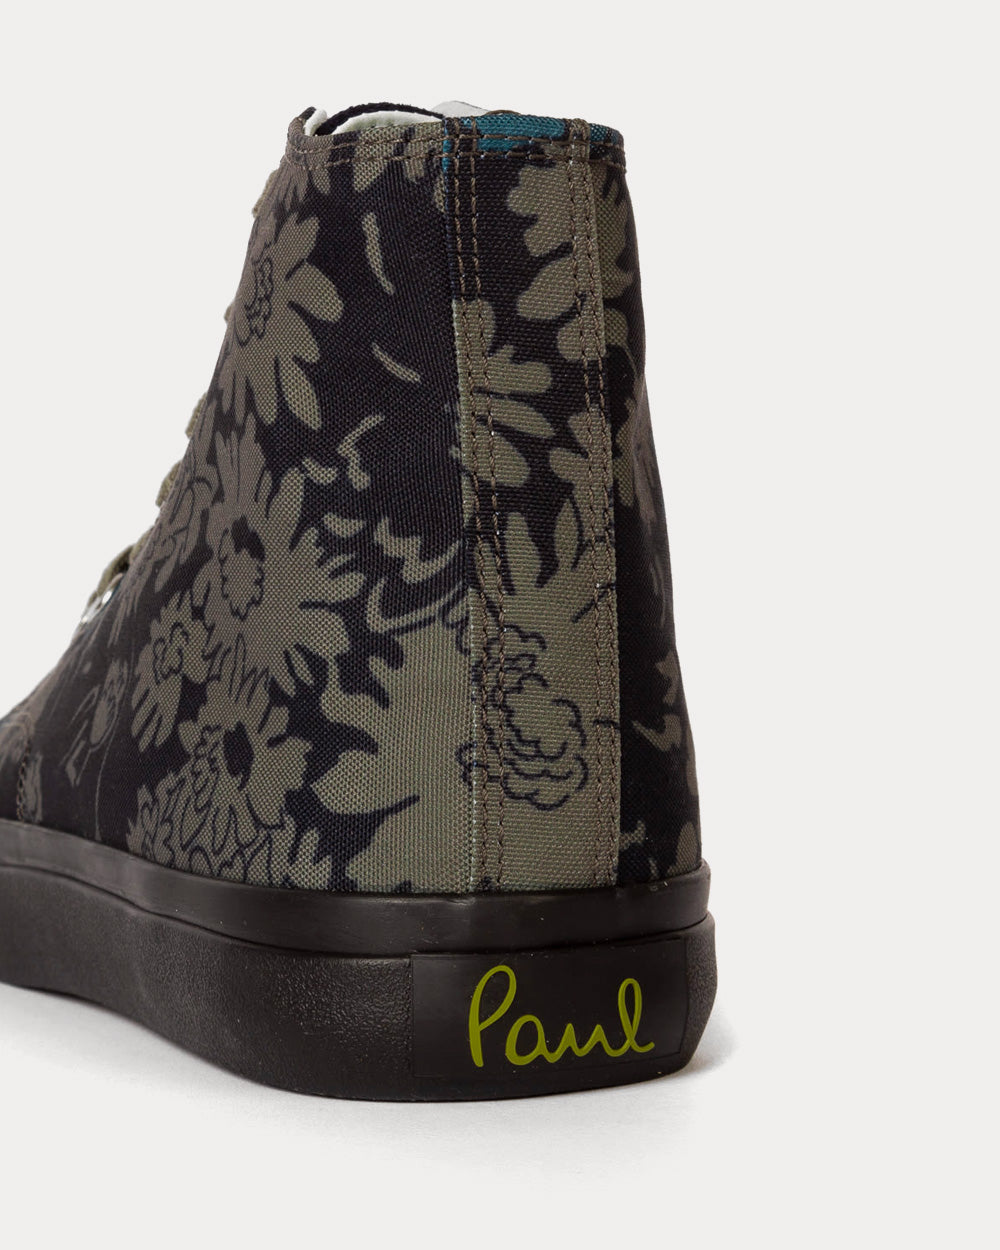 Paul Smith - Carver Archive Floral Green High Top Sneakers